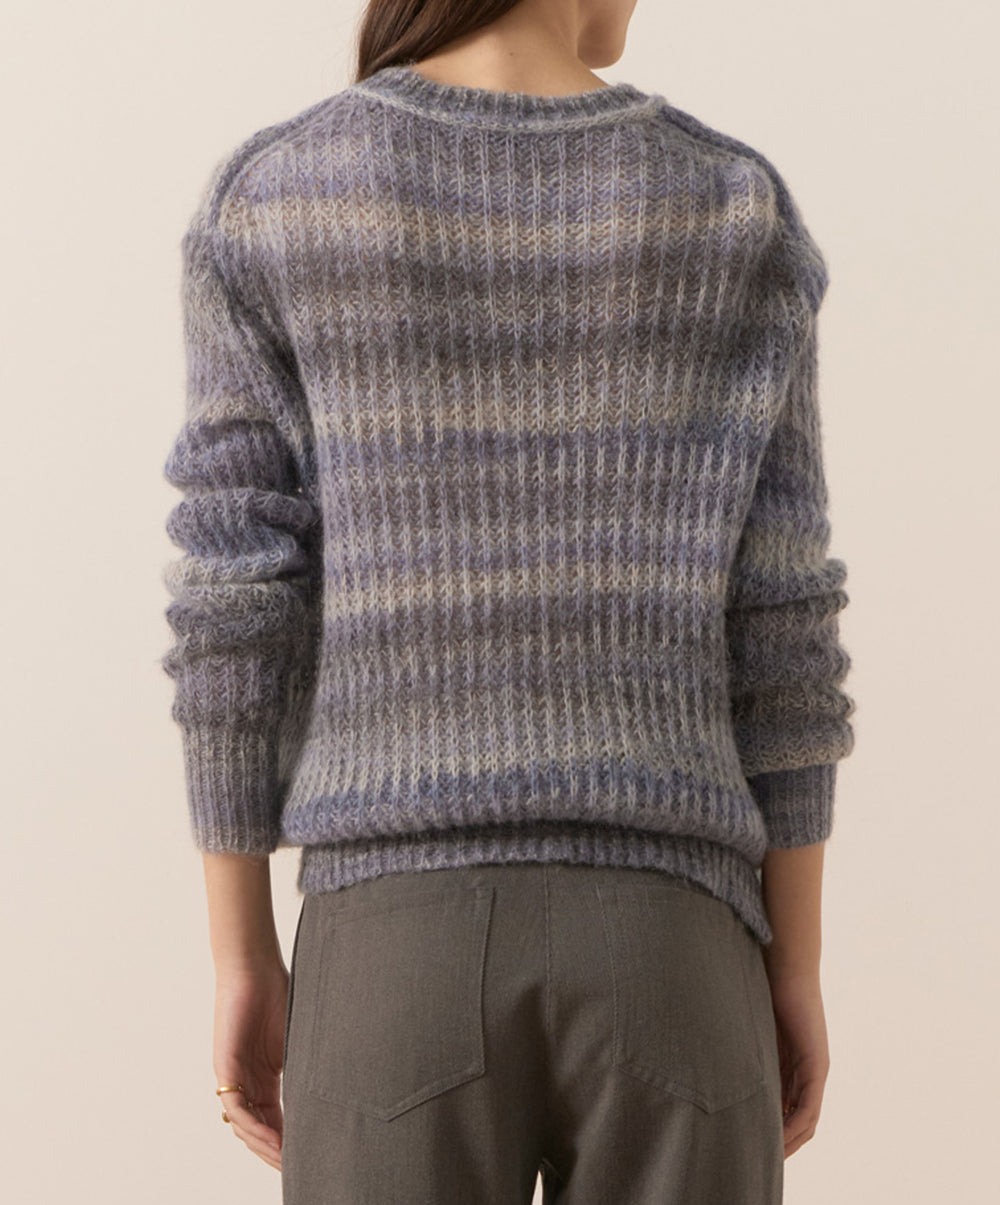 Russo Space Dyed Knit